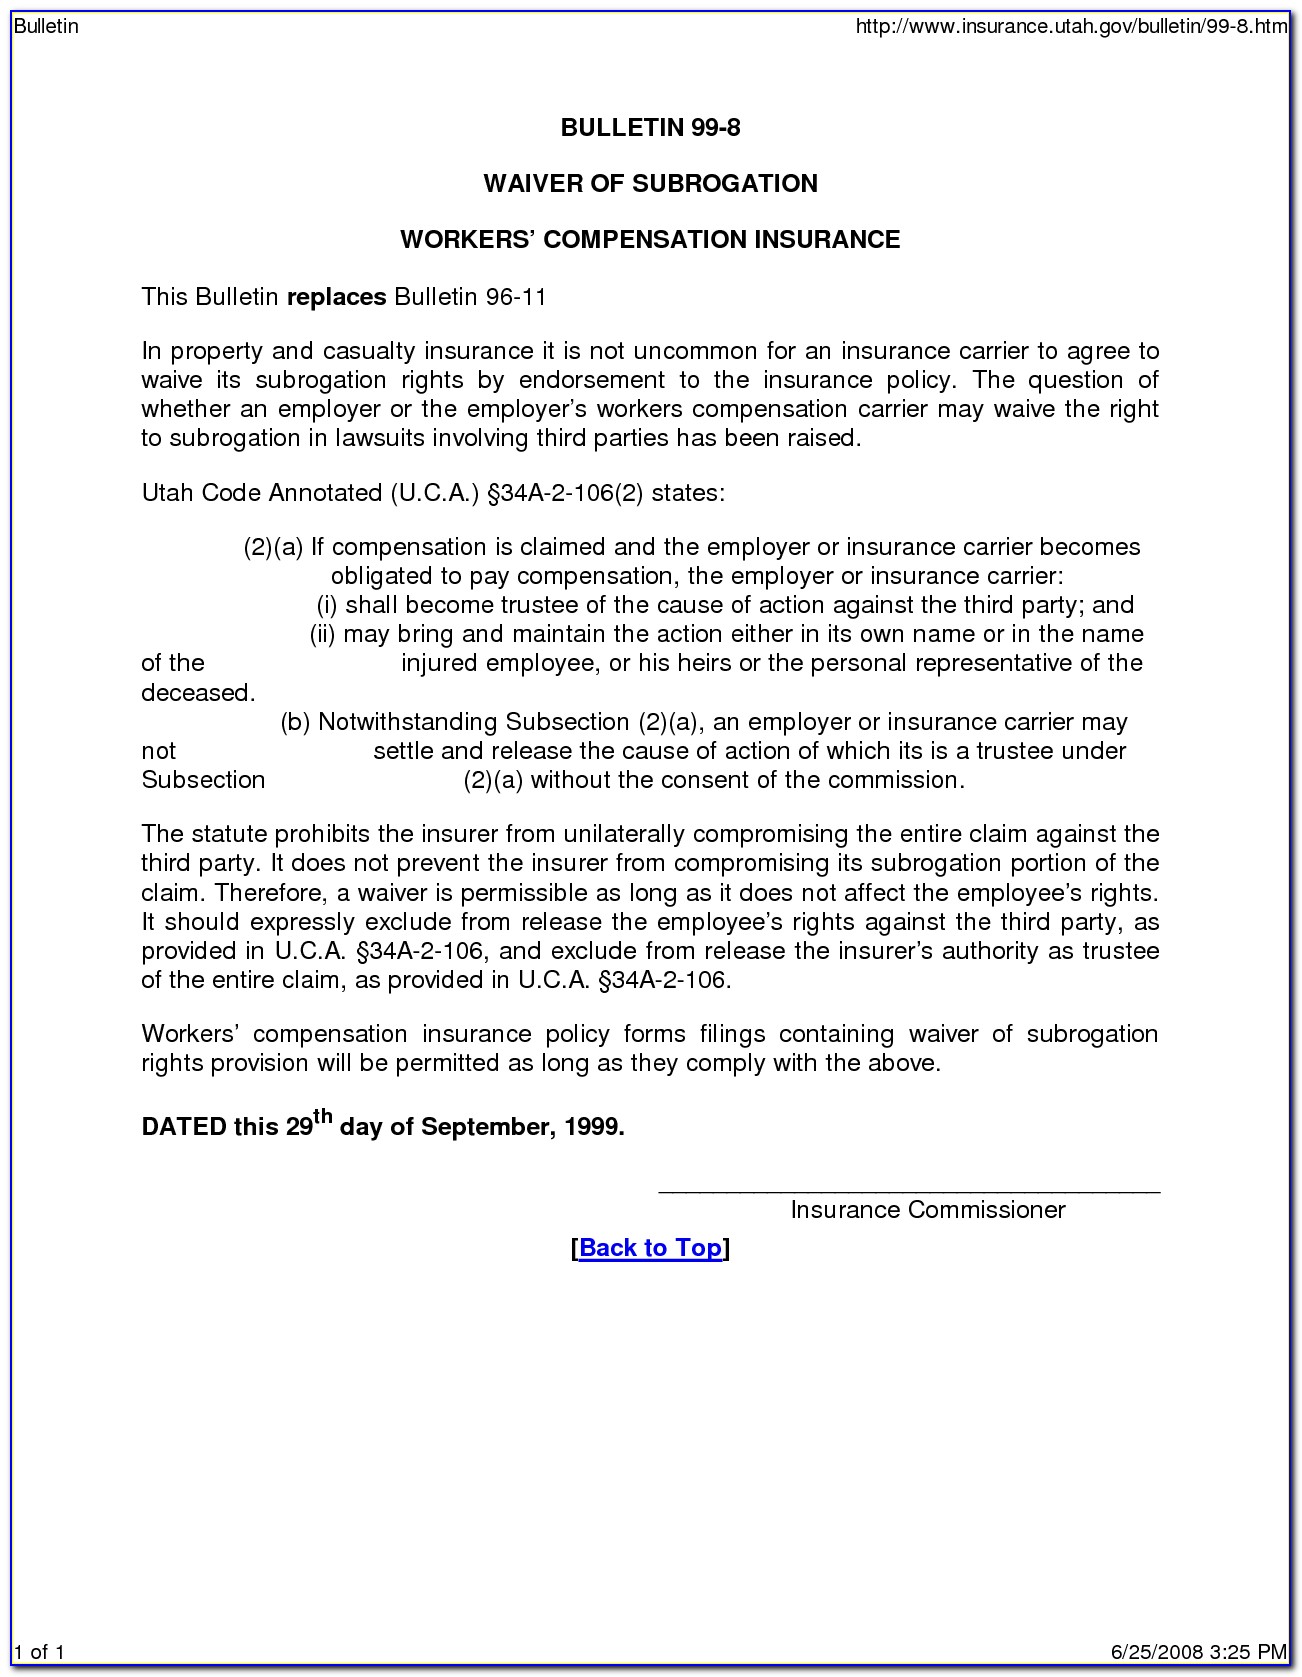 Waiver Of Subrogation Form For Workers Compensation